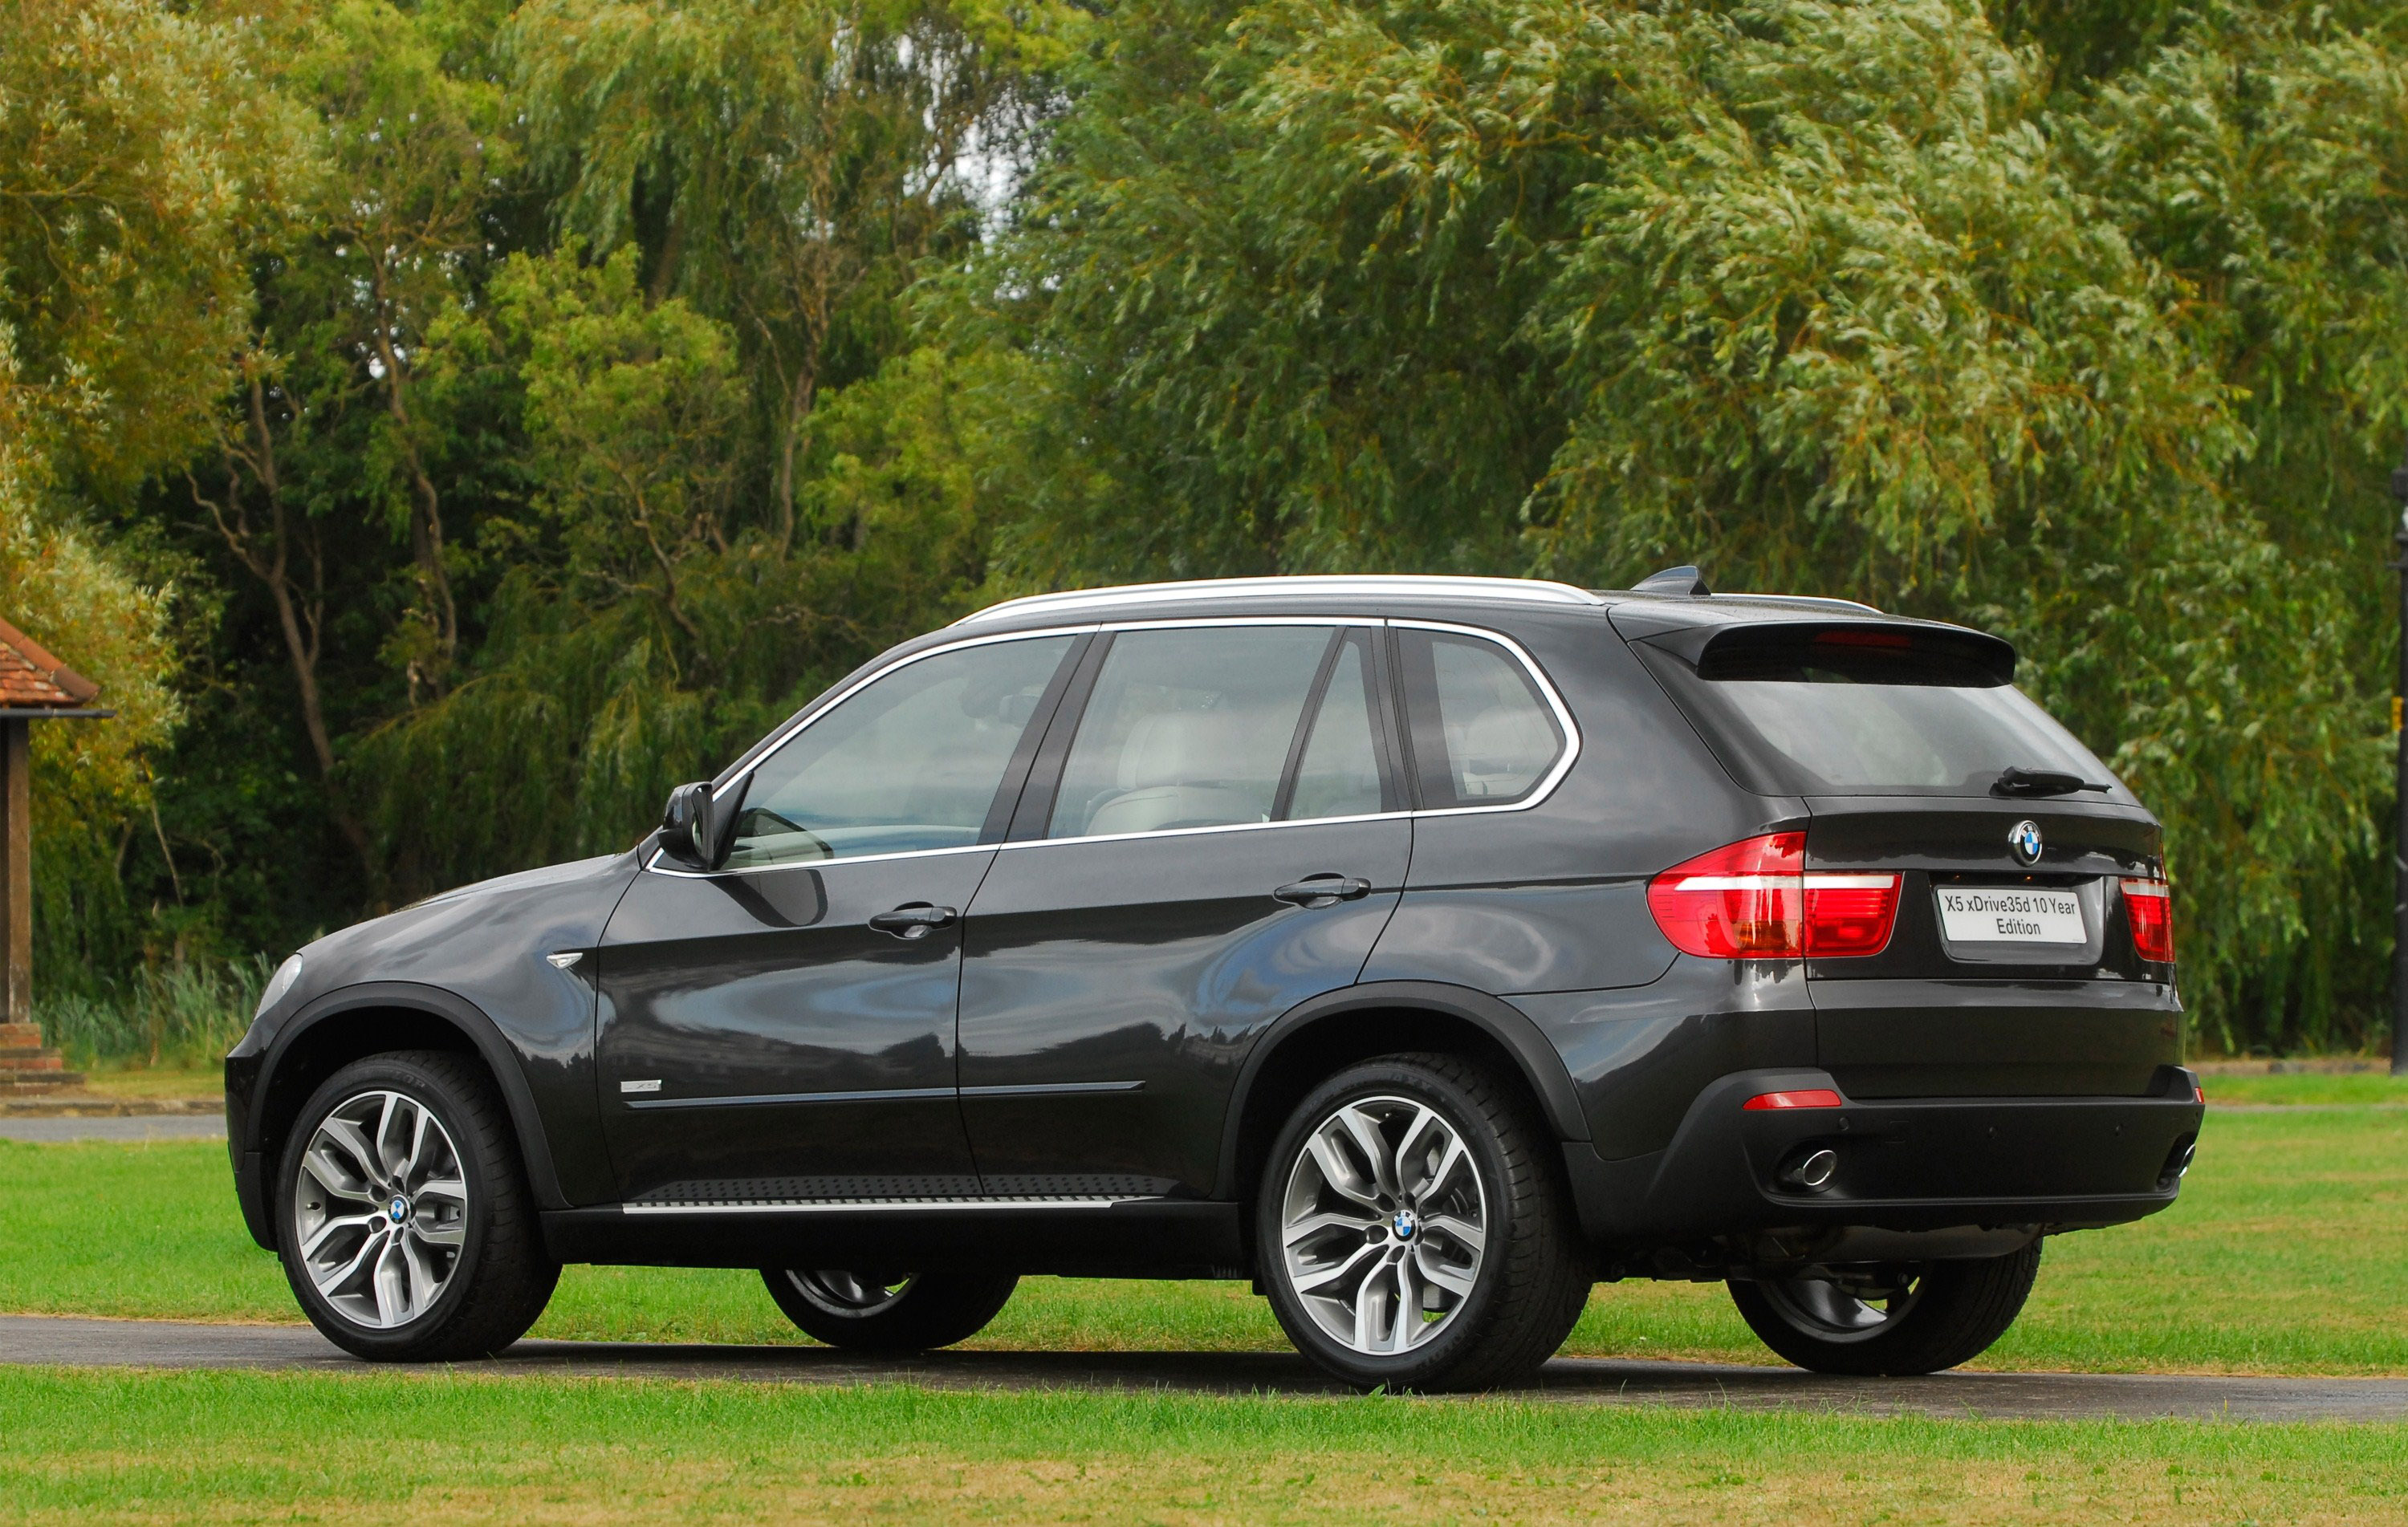 Bmw x5 10 year edition review